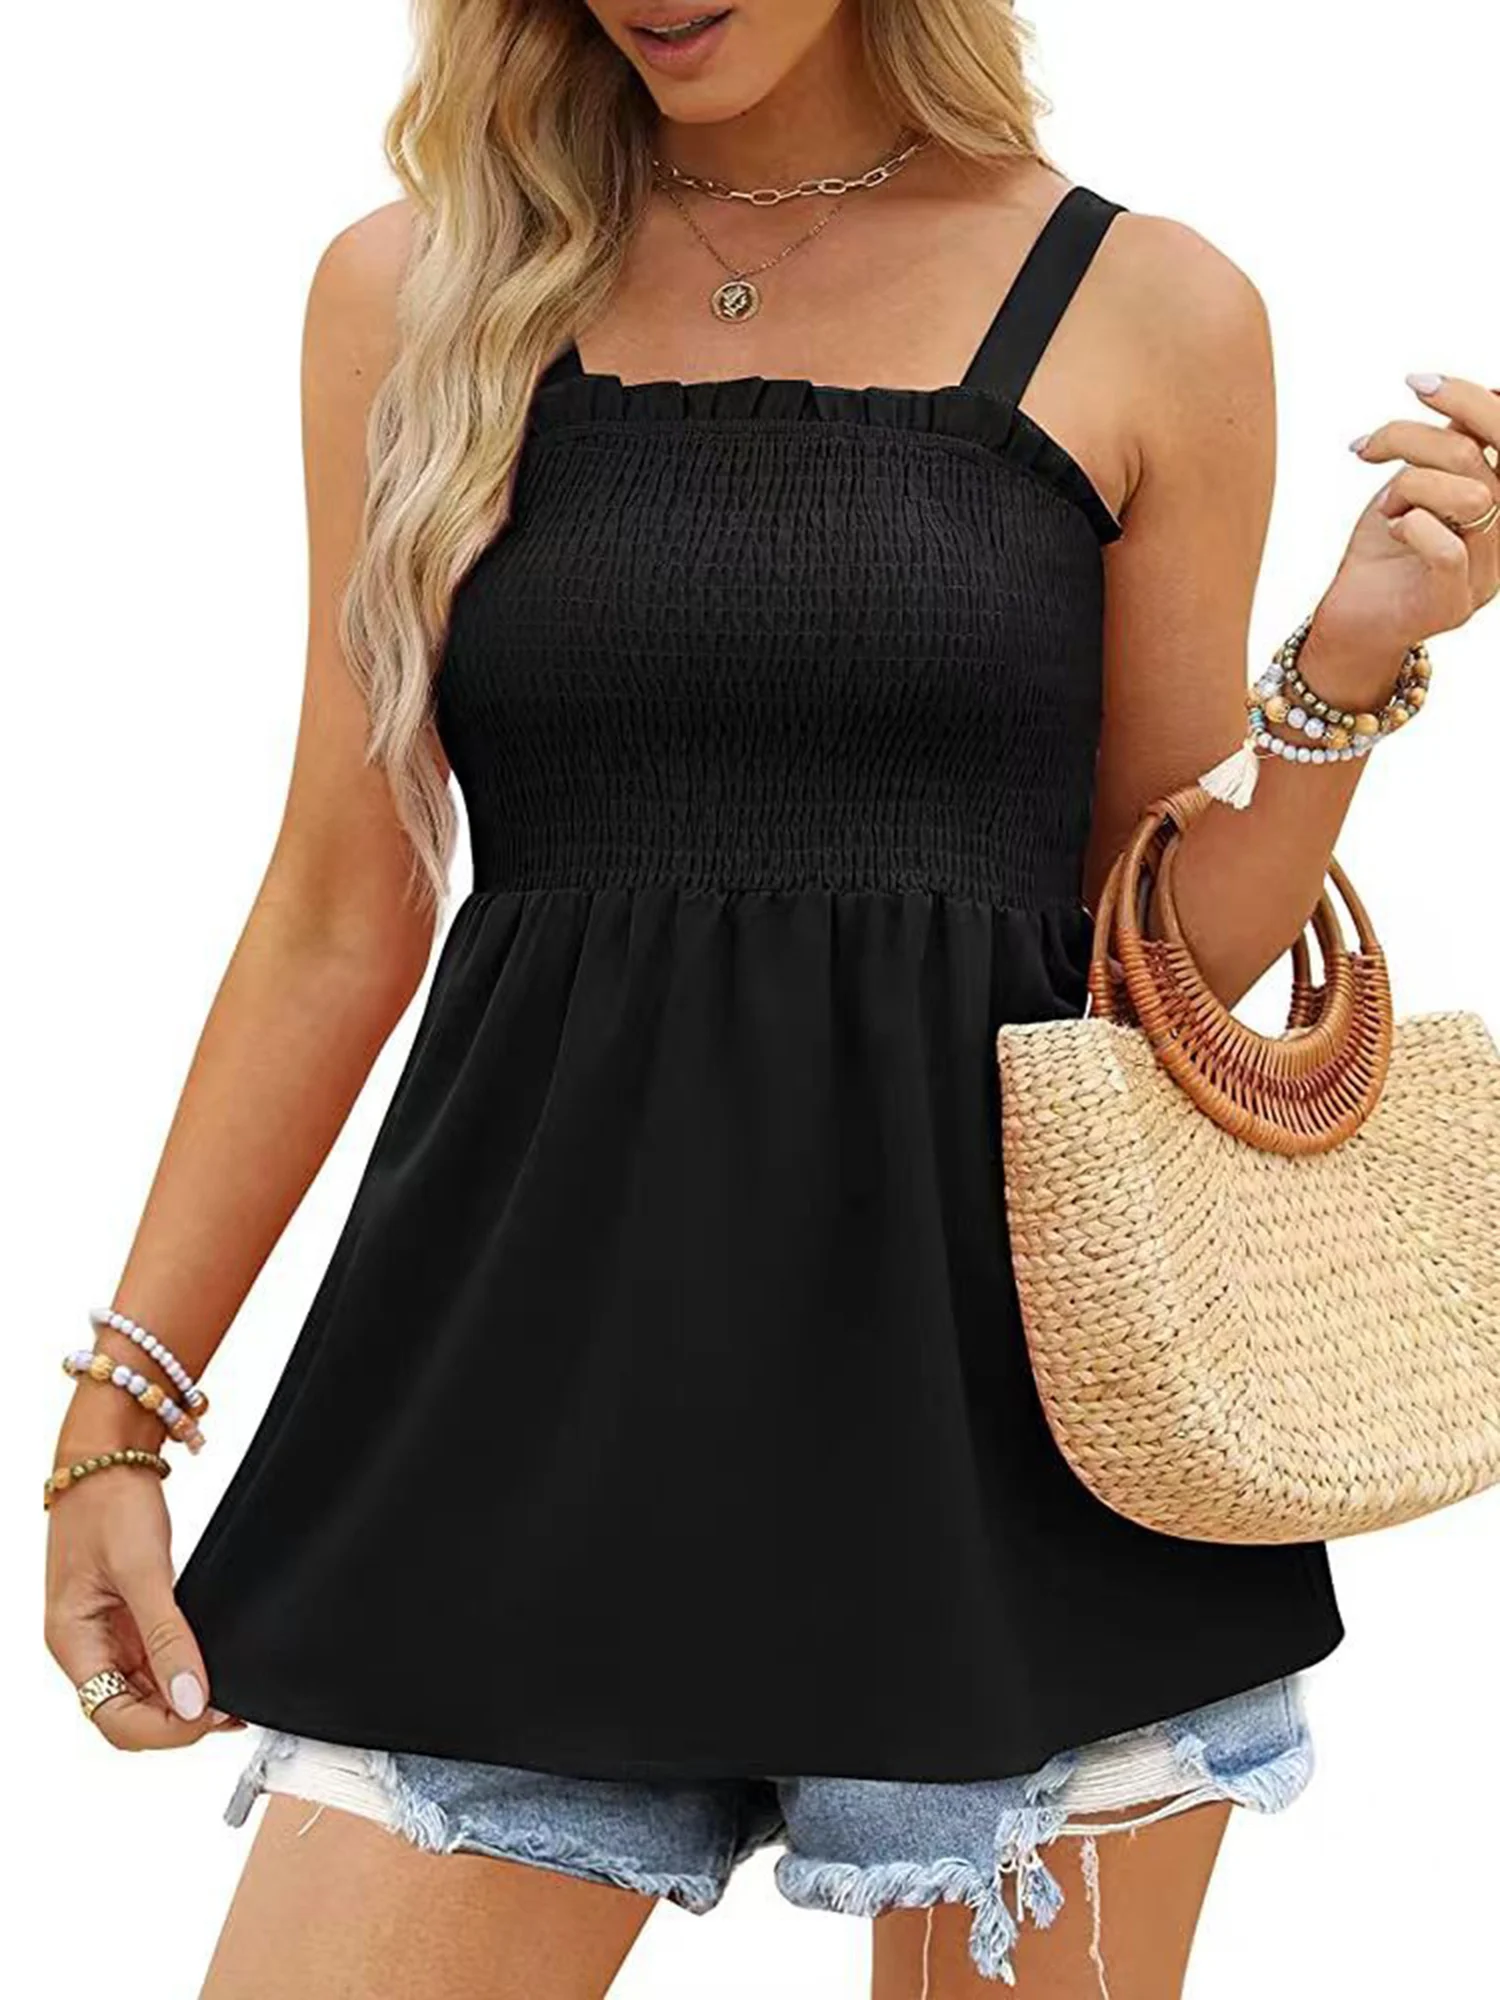 

Sleeveless Swing Ruffle Dress for Women - Summer Casual Solid Color Short Dress Perfect for Beach and Sundress Occasions -